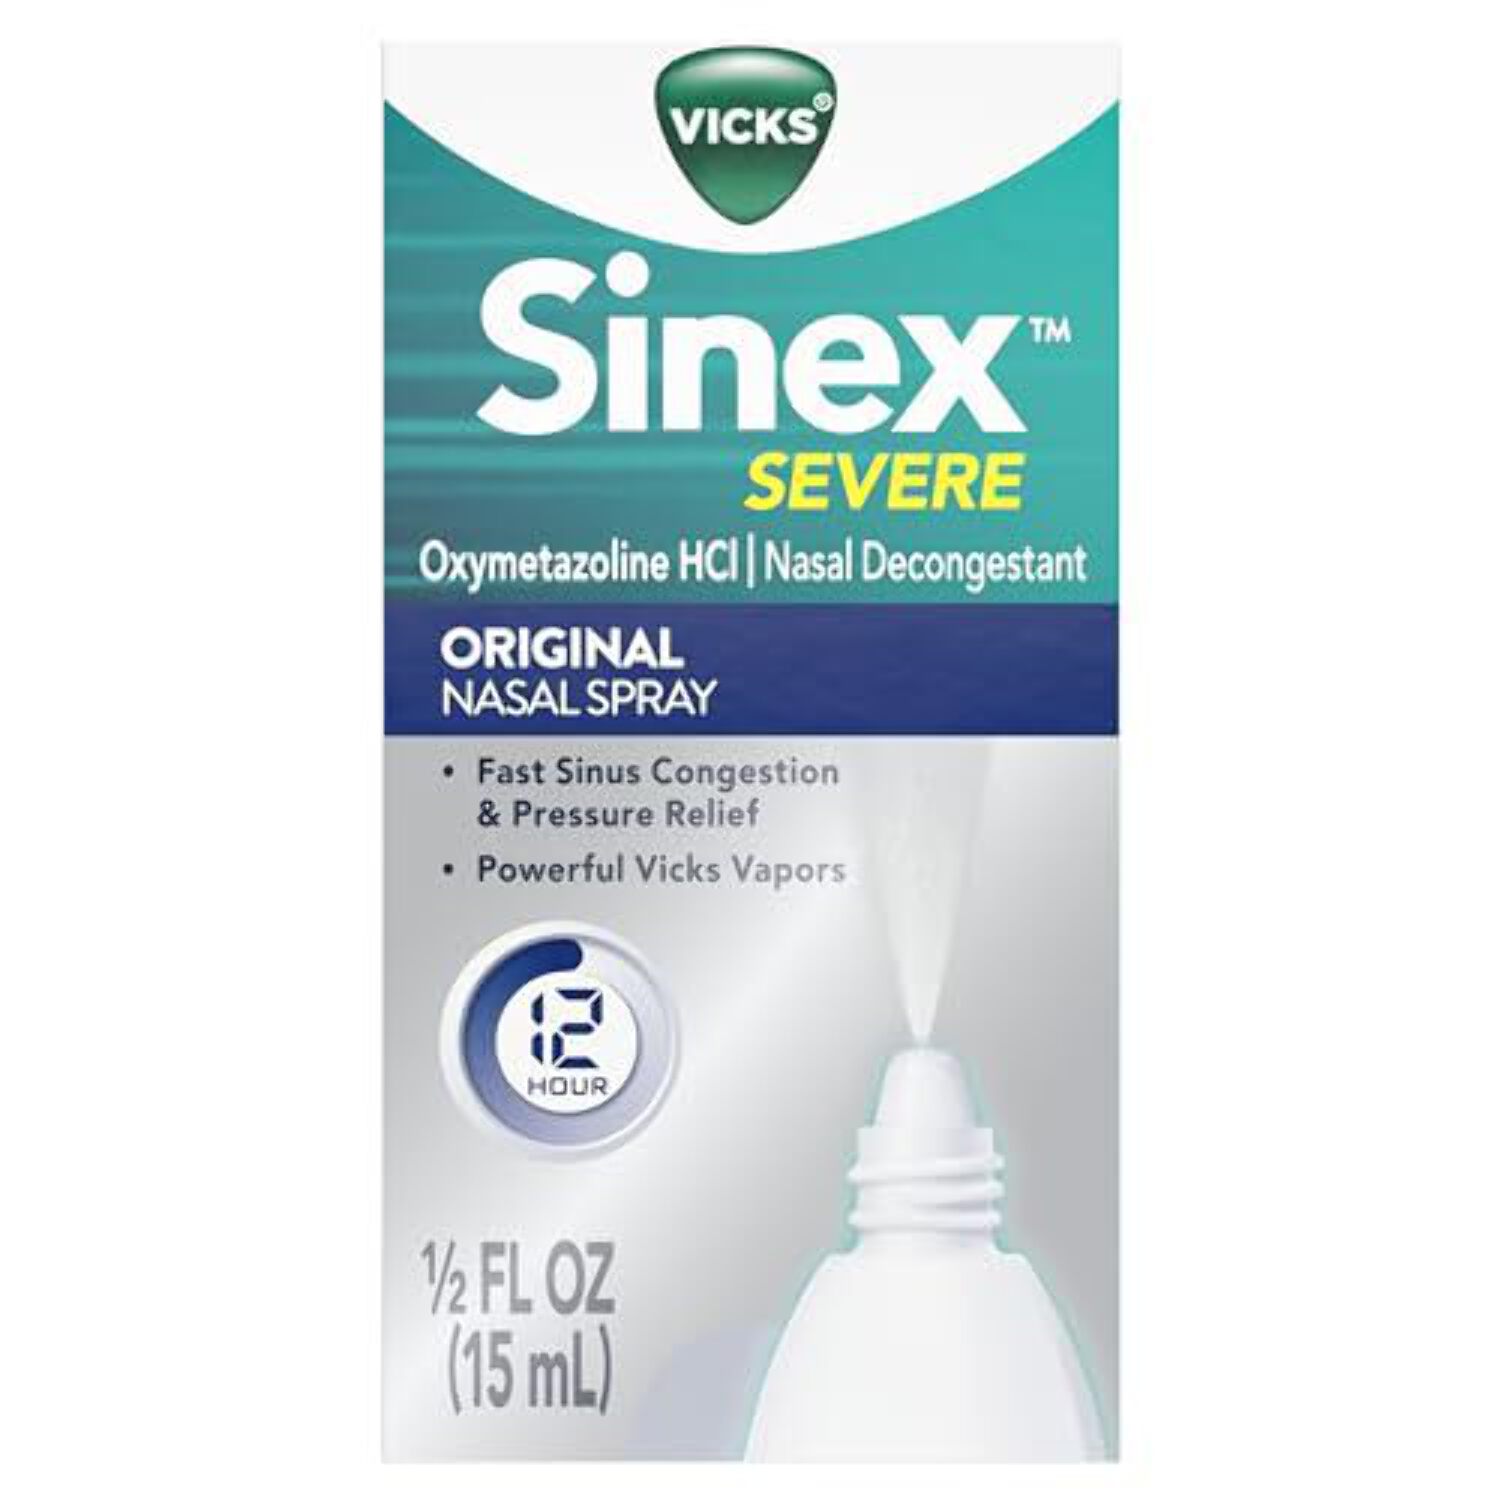 Vicks Sinex Severe Original Nasal Spray, Decongestant Medicine, Relief from Stuffy Nose due to Cold or Allergy, & Nasal Congestion, Sinus Pressure Relief, 0.5 fl oz - image 1 of 8